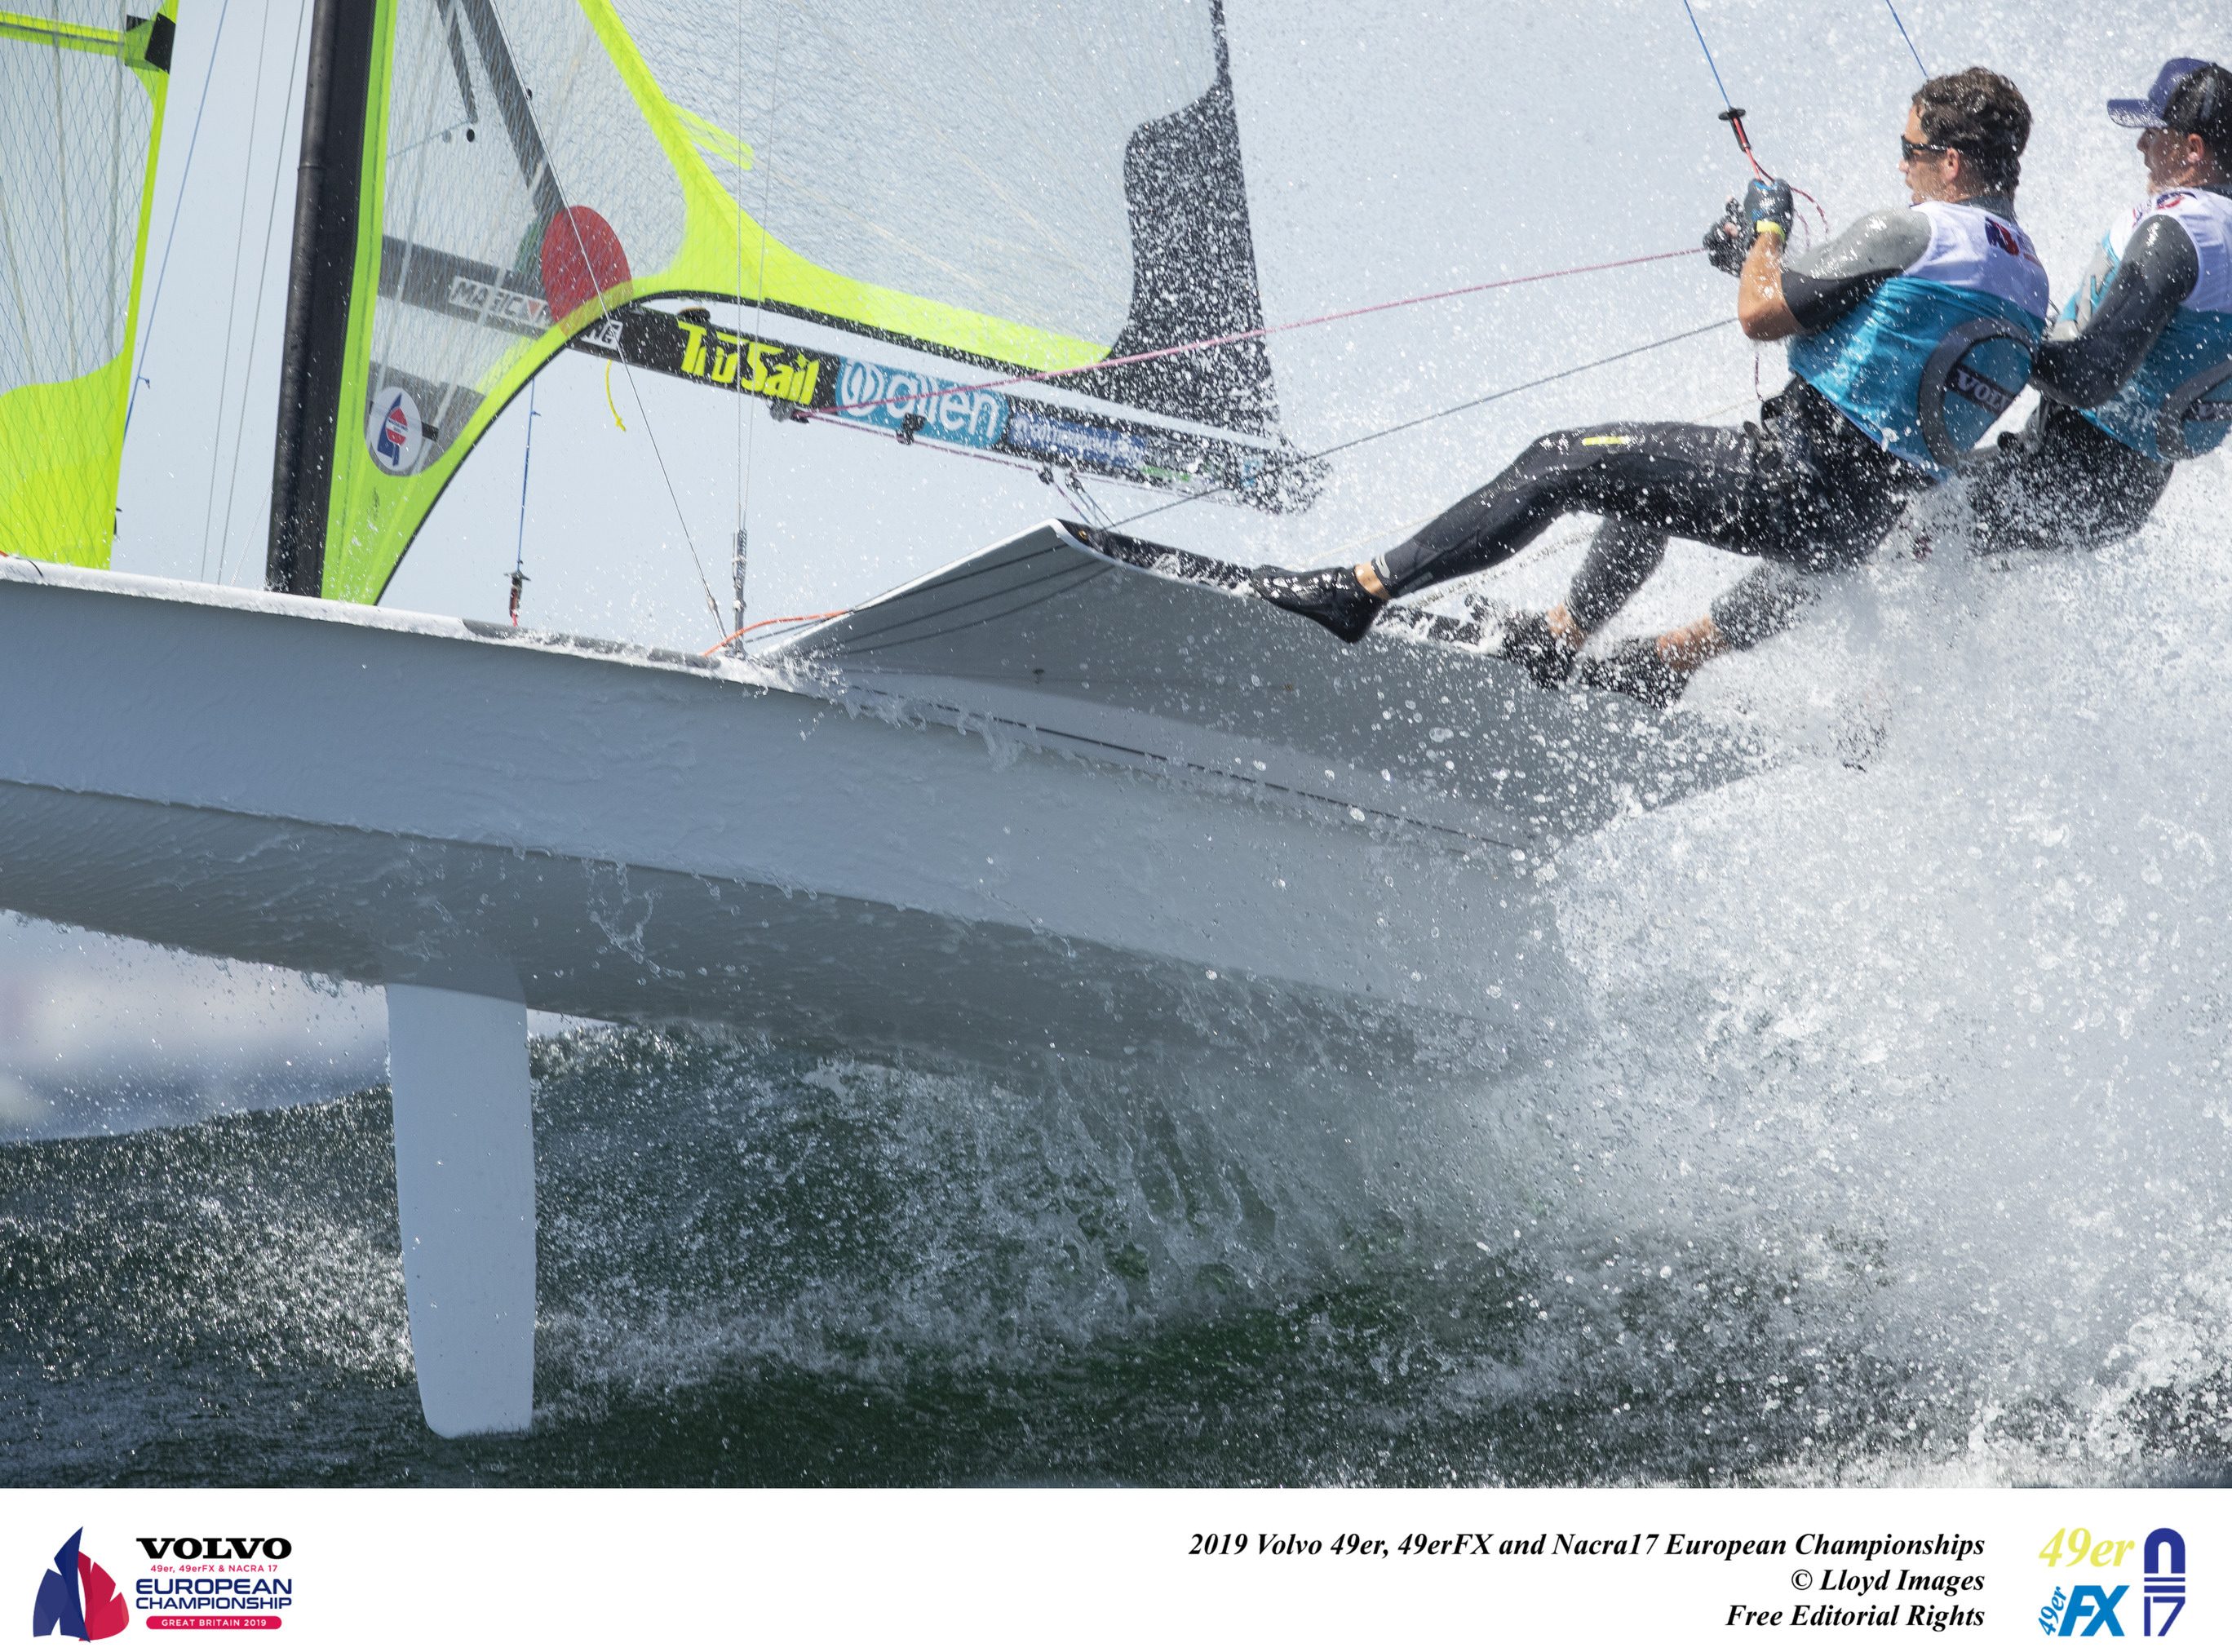  49er, 49erFX, Nacra17  European Championships 2019  Weymouth GBR  Day 2  excellent 9th for Tenhove/Millen CAN in 49ersFX, medium results and less for other North Americans